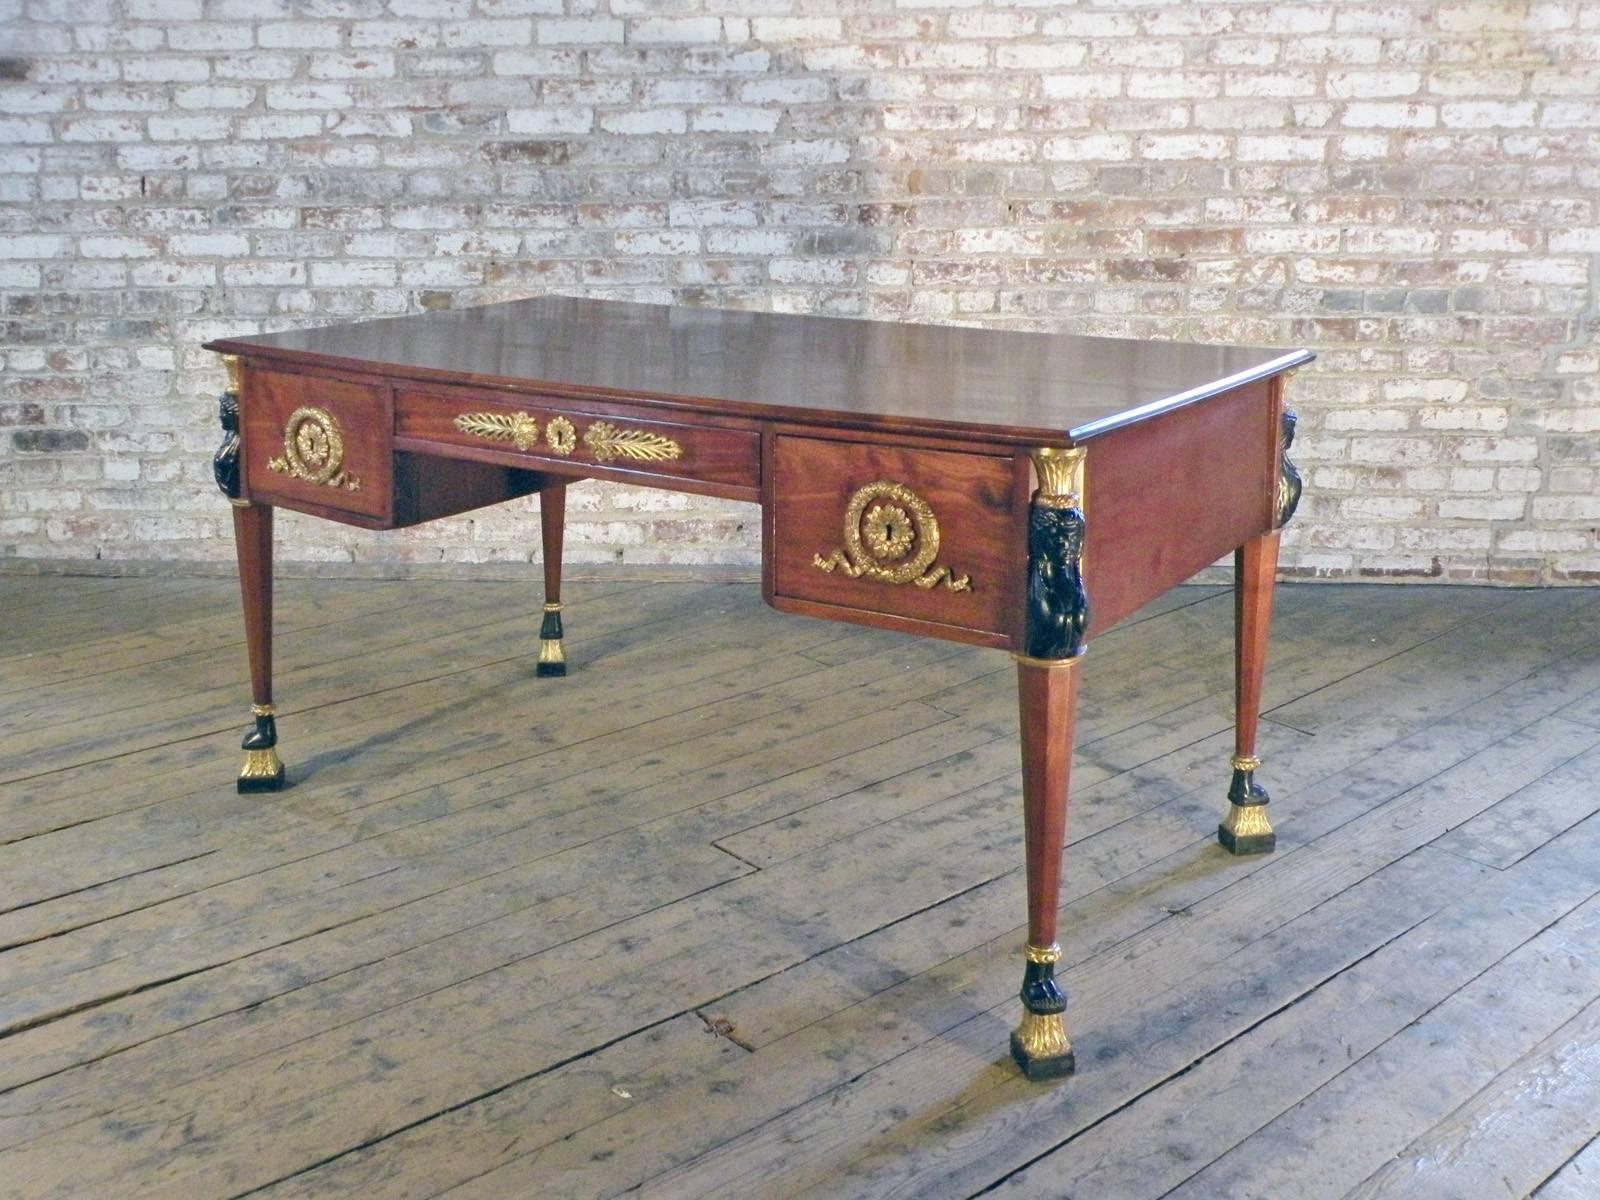 Elegant French Empire bureau-plat or partners desk, The top, inlaid with a center-star-motive and small decorations on each corner, above five drawers, the middle one opening from the front only, the flanking side drawers accessible on both sides,